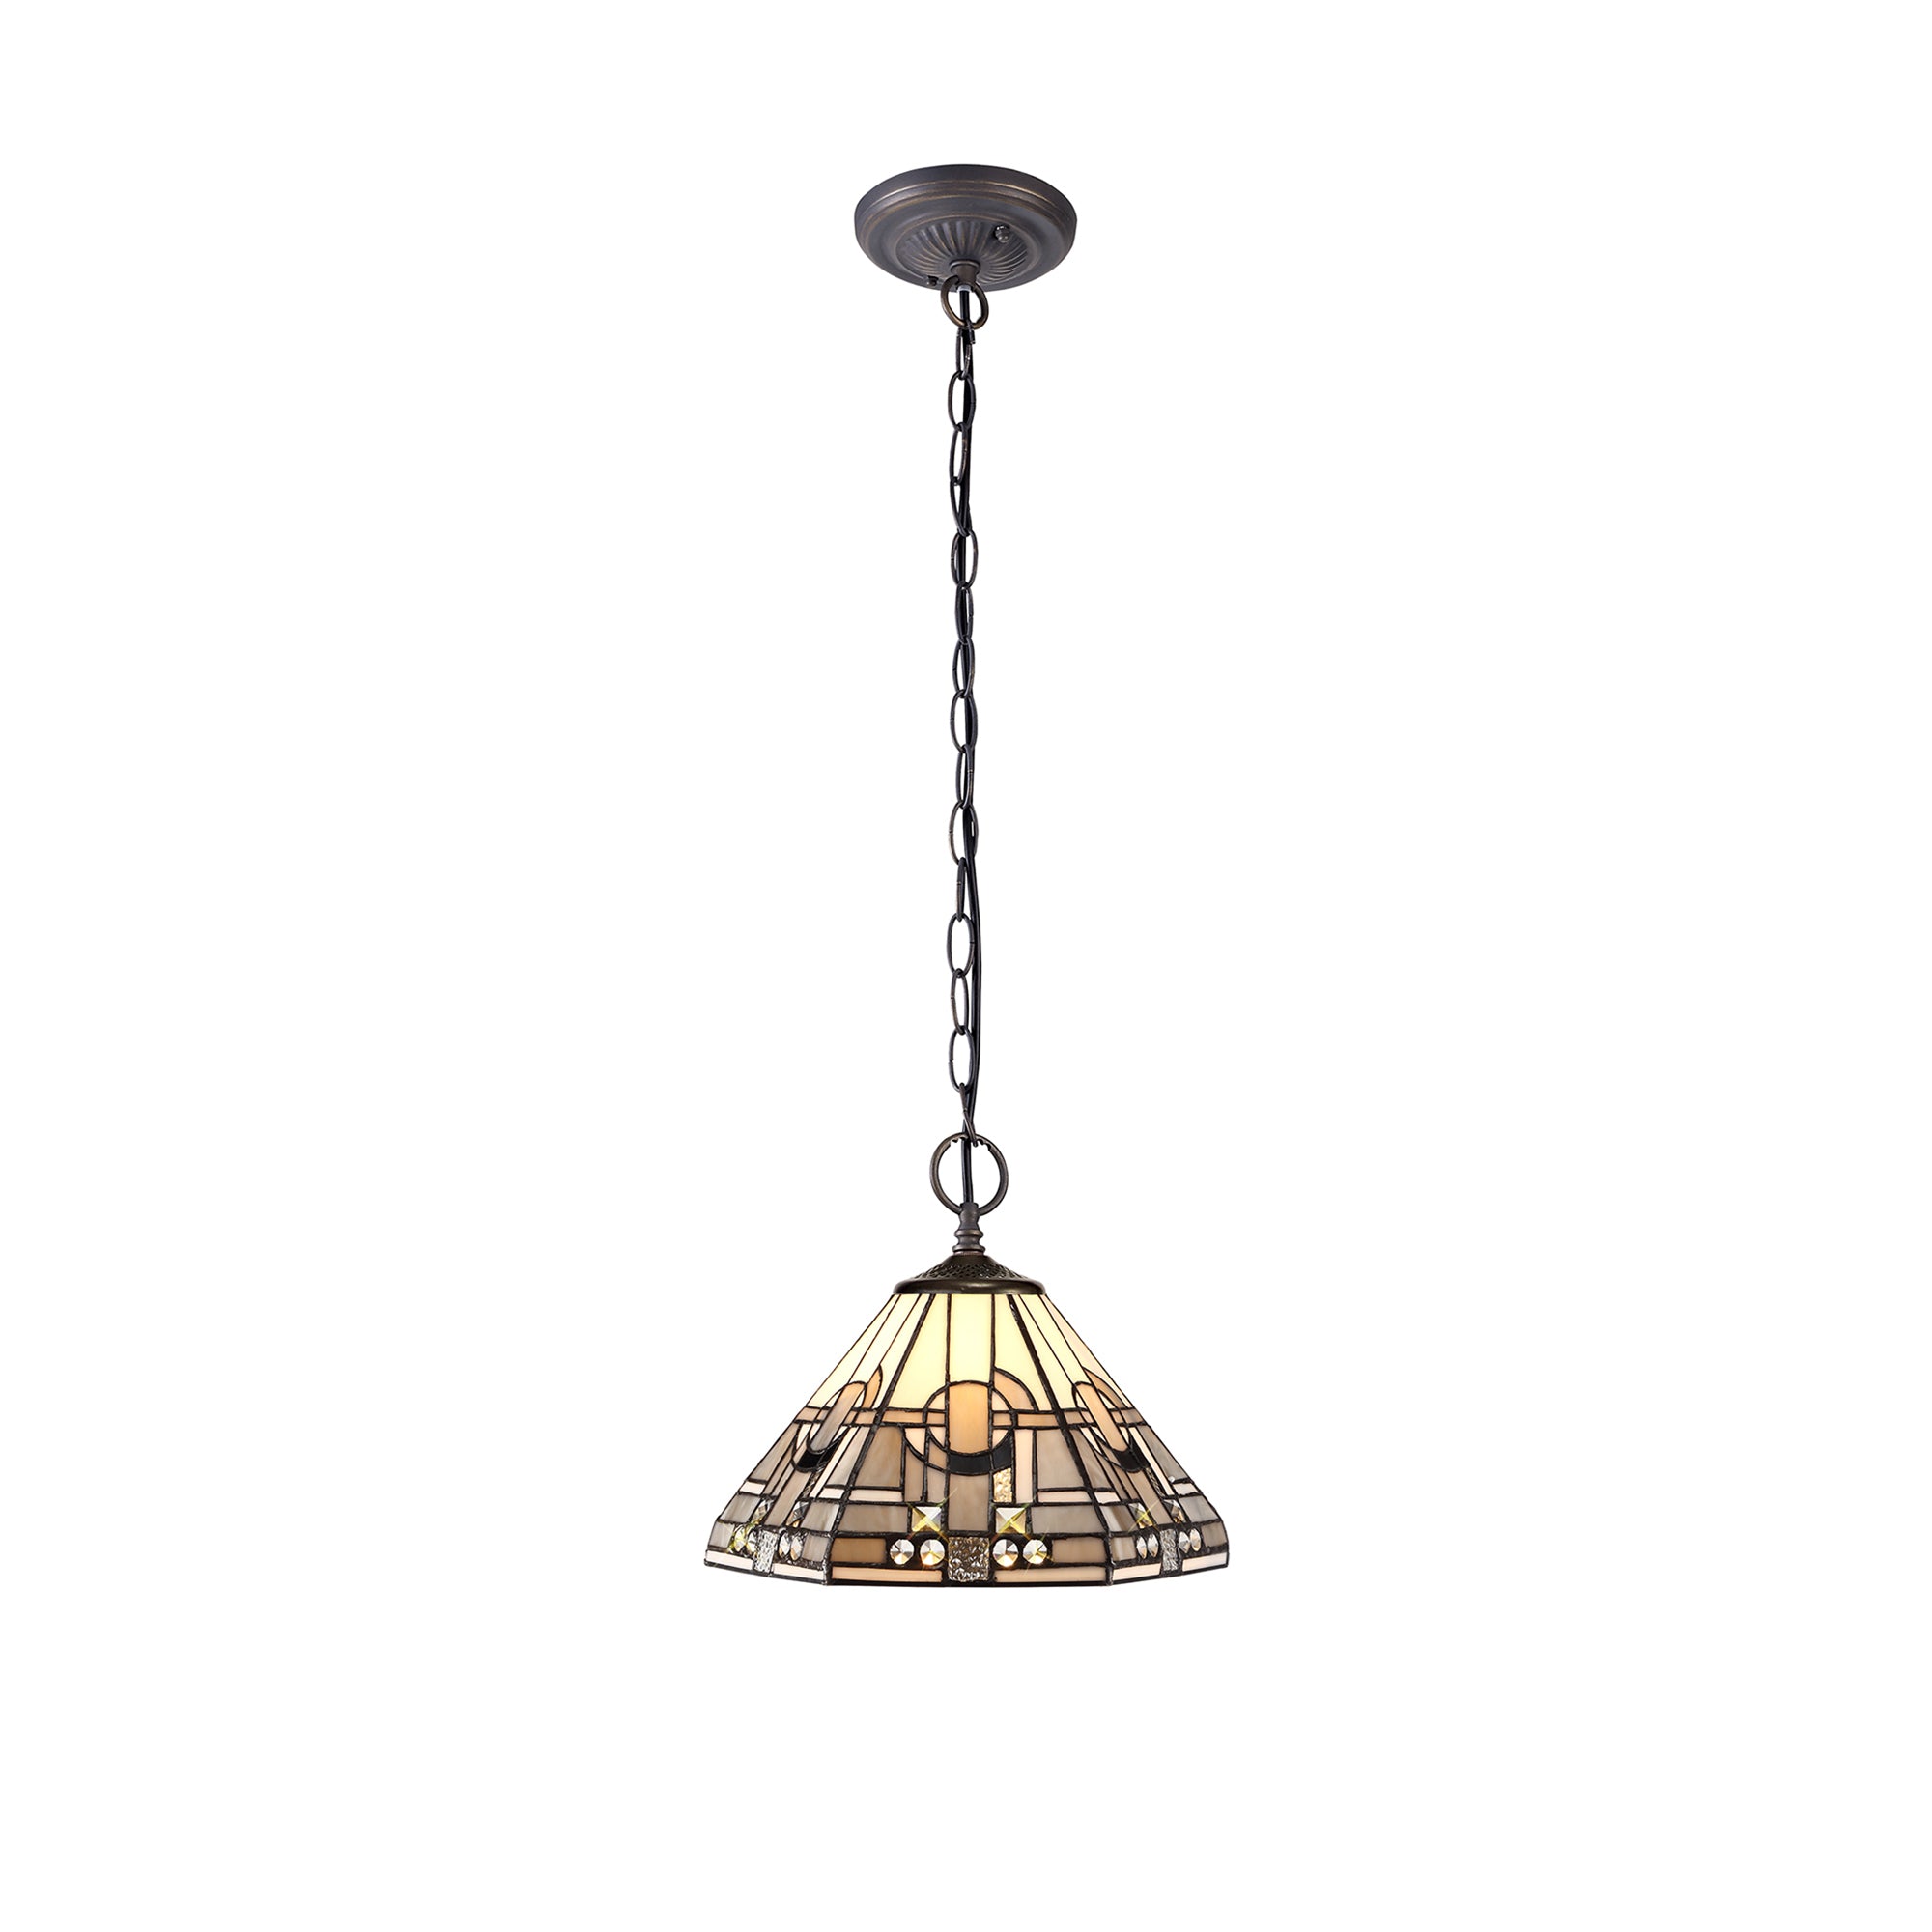 Atek 2 Light Downlighter Pendant E27 With 30cm Tiffany Shade, White/Grey/Black/Clear Crystal/Aged Antique Brass